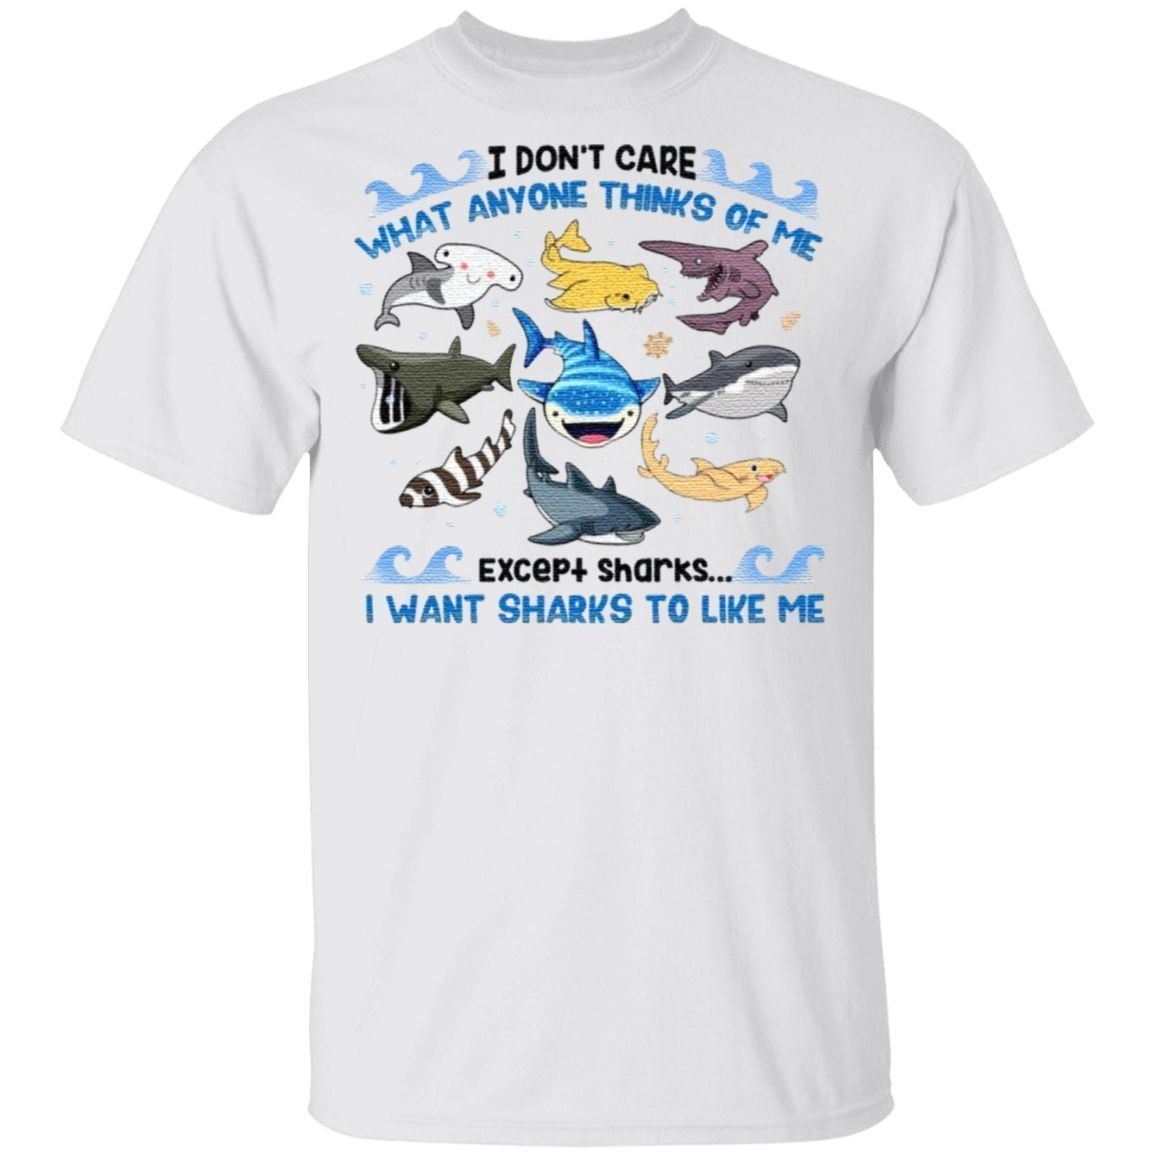 I Don’t Care What Anyone Thinks Of Me Except Sharks I Want Sharks To Like Me T Shirt